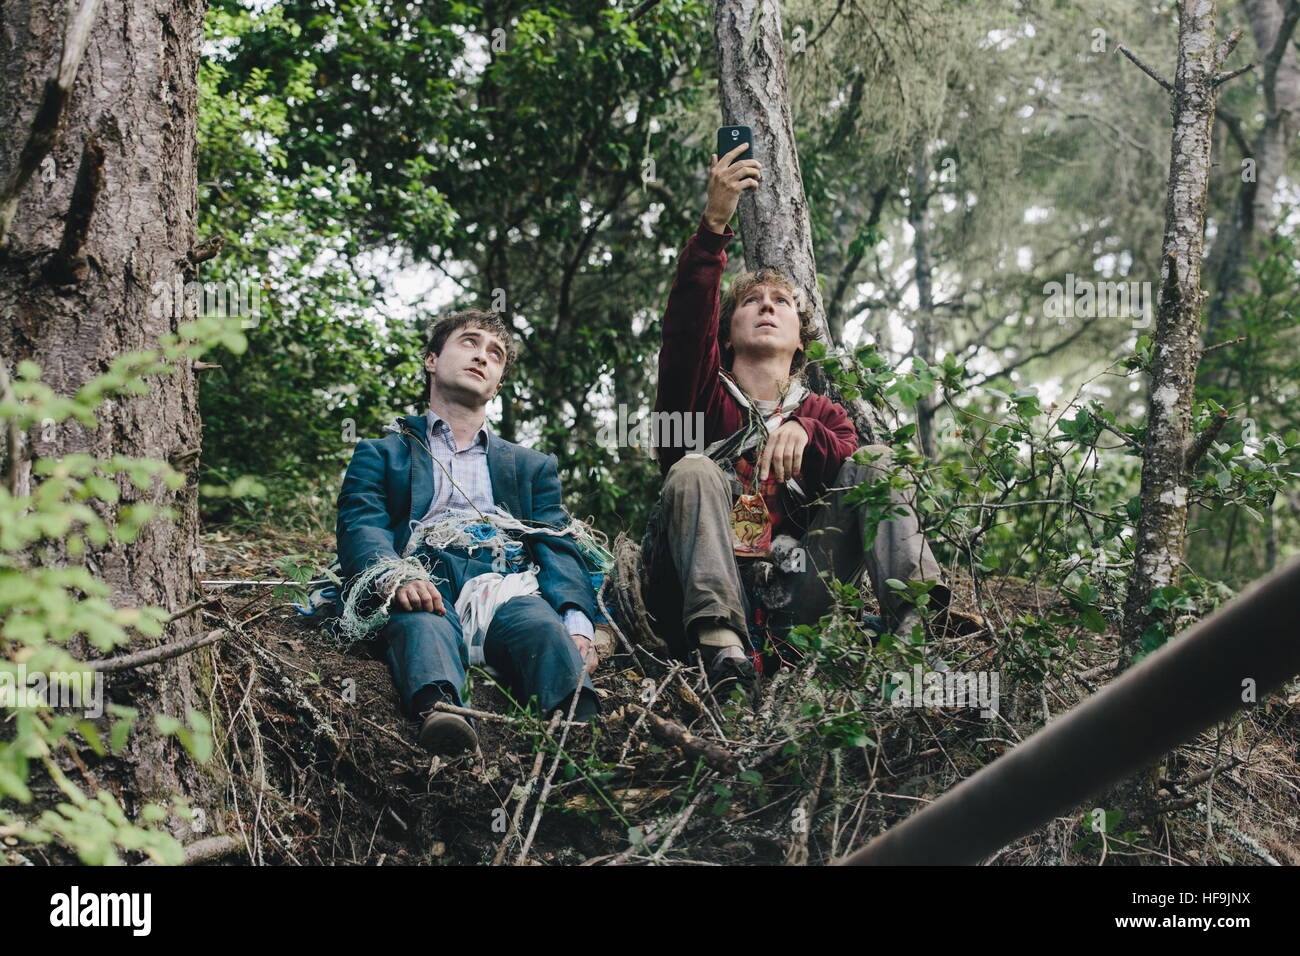 RELEASE DATE: July 1, 2016 TITLE: Swiss Army Man STUDIO: Cold Iron Pictures DIRECTOR: Dan Kwan, Daniel Scheinert PLOT: A hopeless man stranded on a deserted island befriends a dead body and together they go on a surreal journey to get home STARRING: Paul Dano as Hank, Daniel Radcliffe as Manny (Credit: © Cold Iron Pictures/Entertainment Pictures) Stock Photo